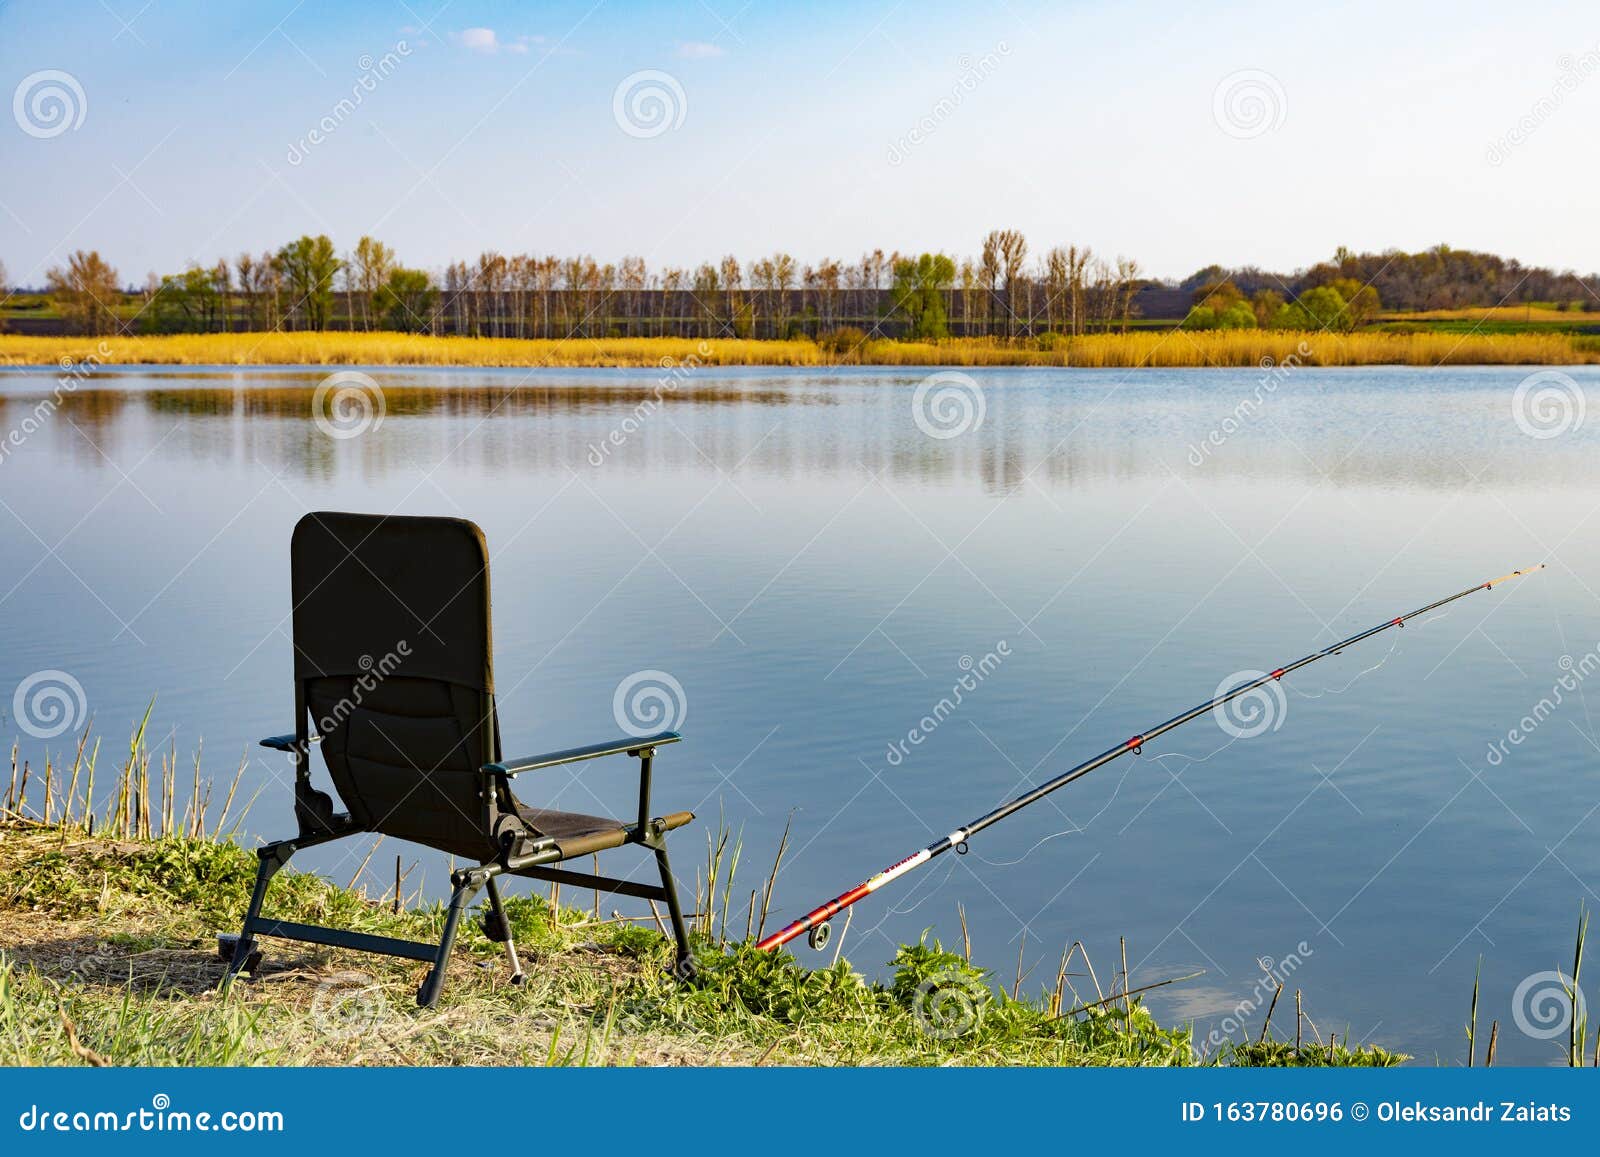 210+ Fishing Pole And Chair On Dock Stock Photos, Pictures